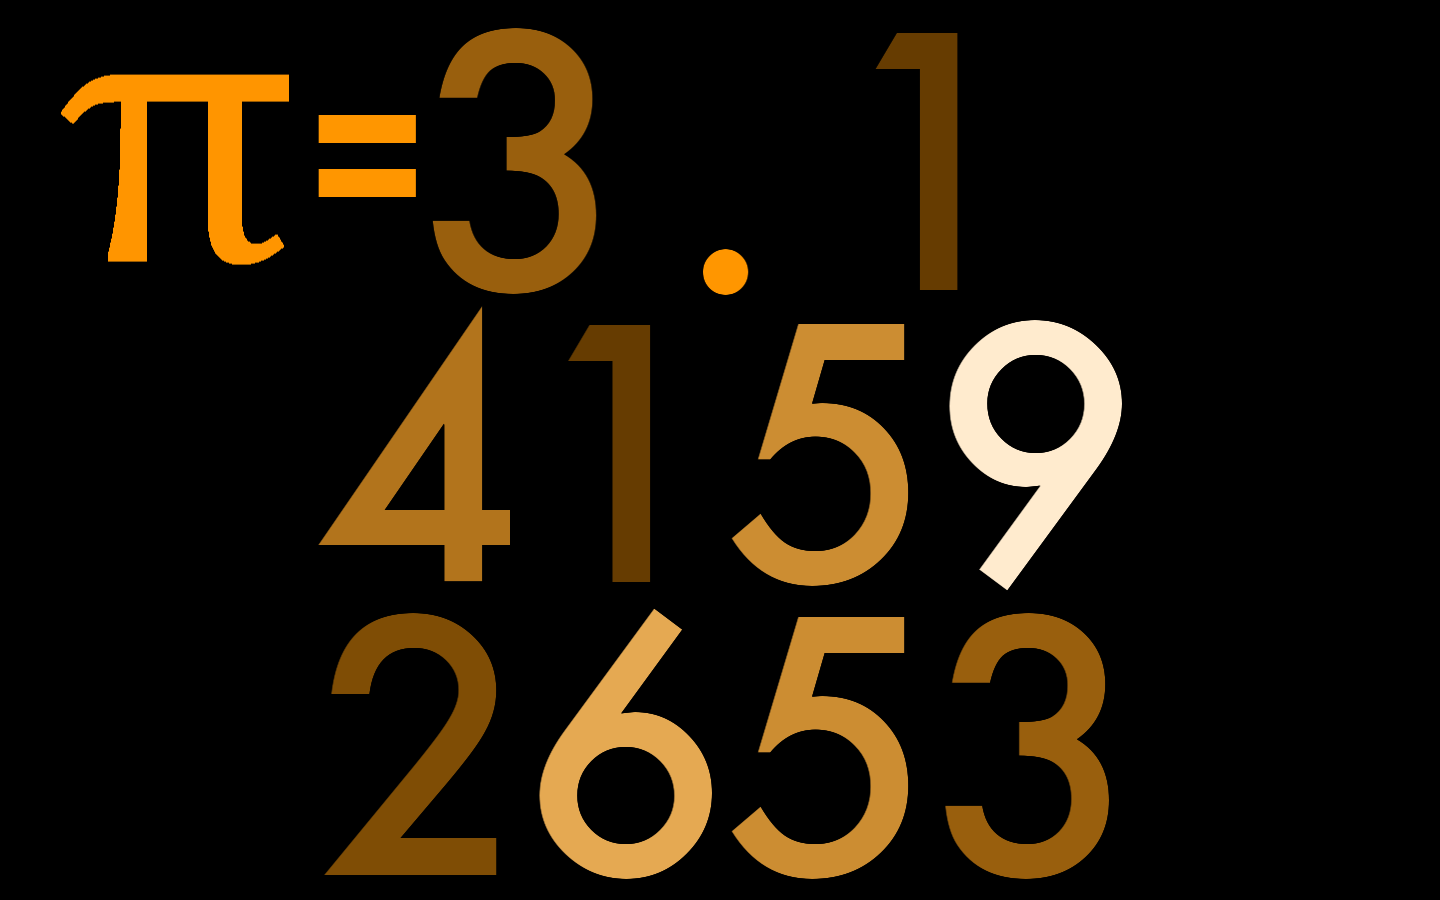 The value of pi converged with 10 decimal places.